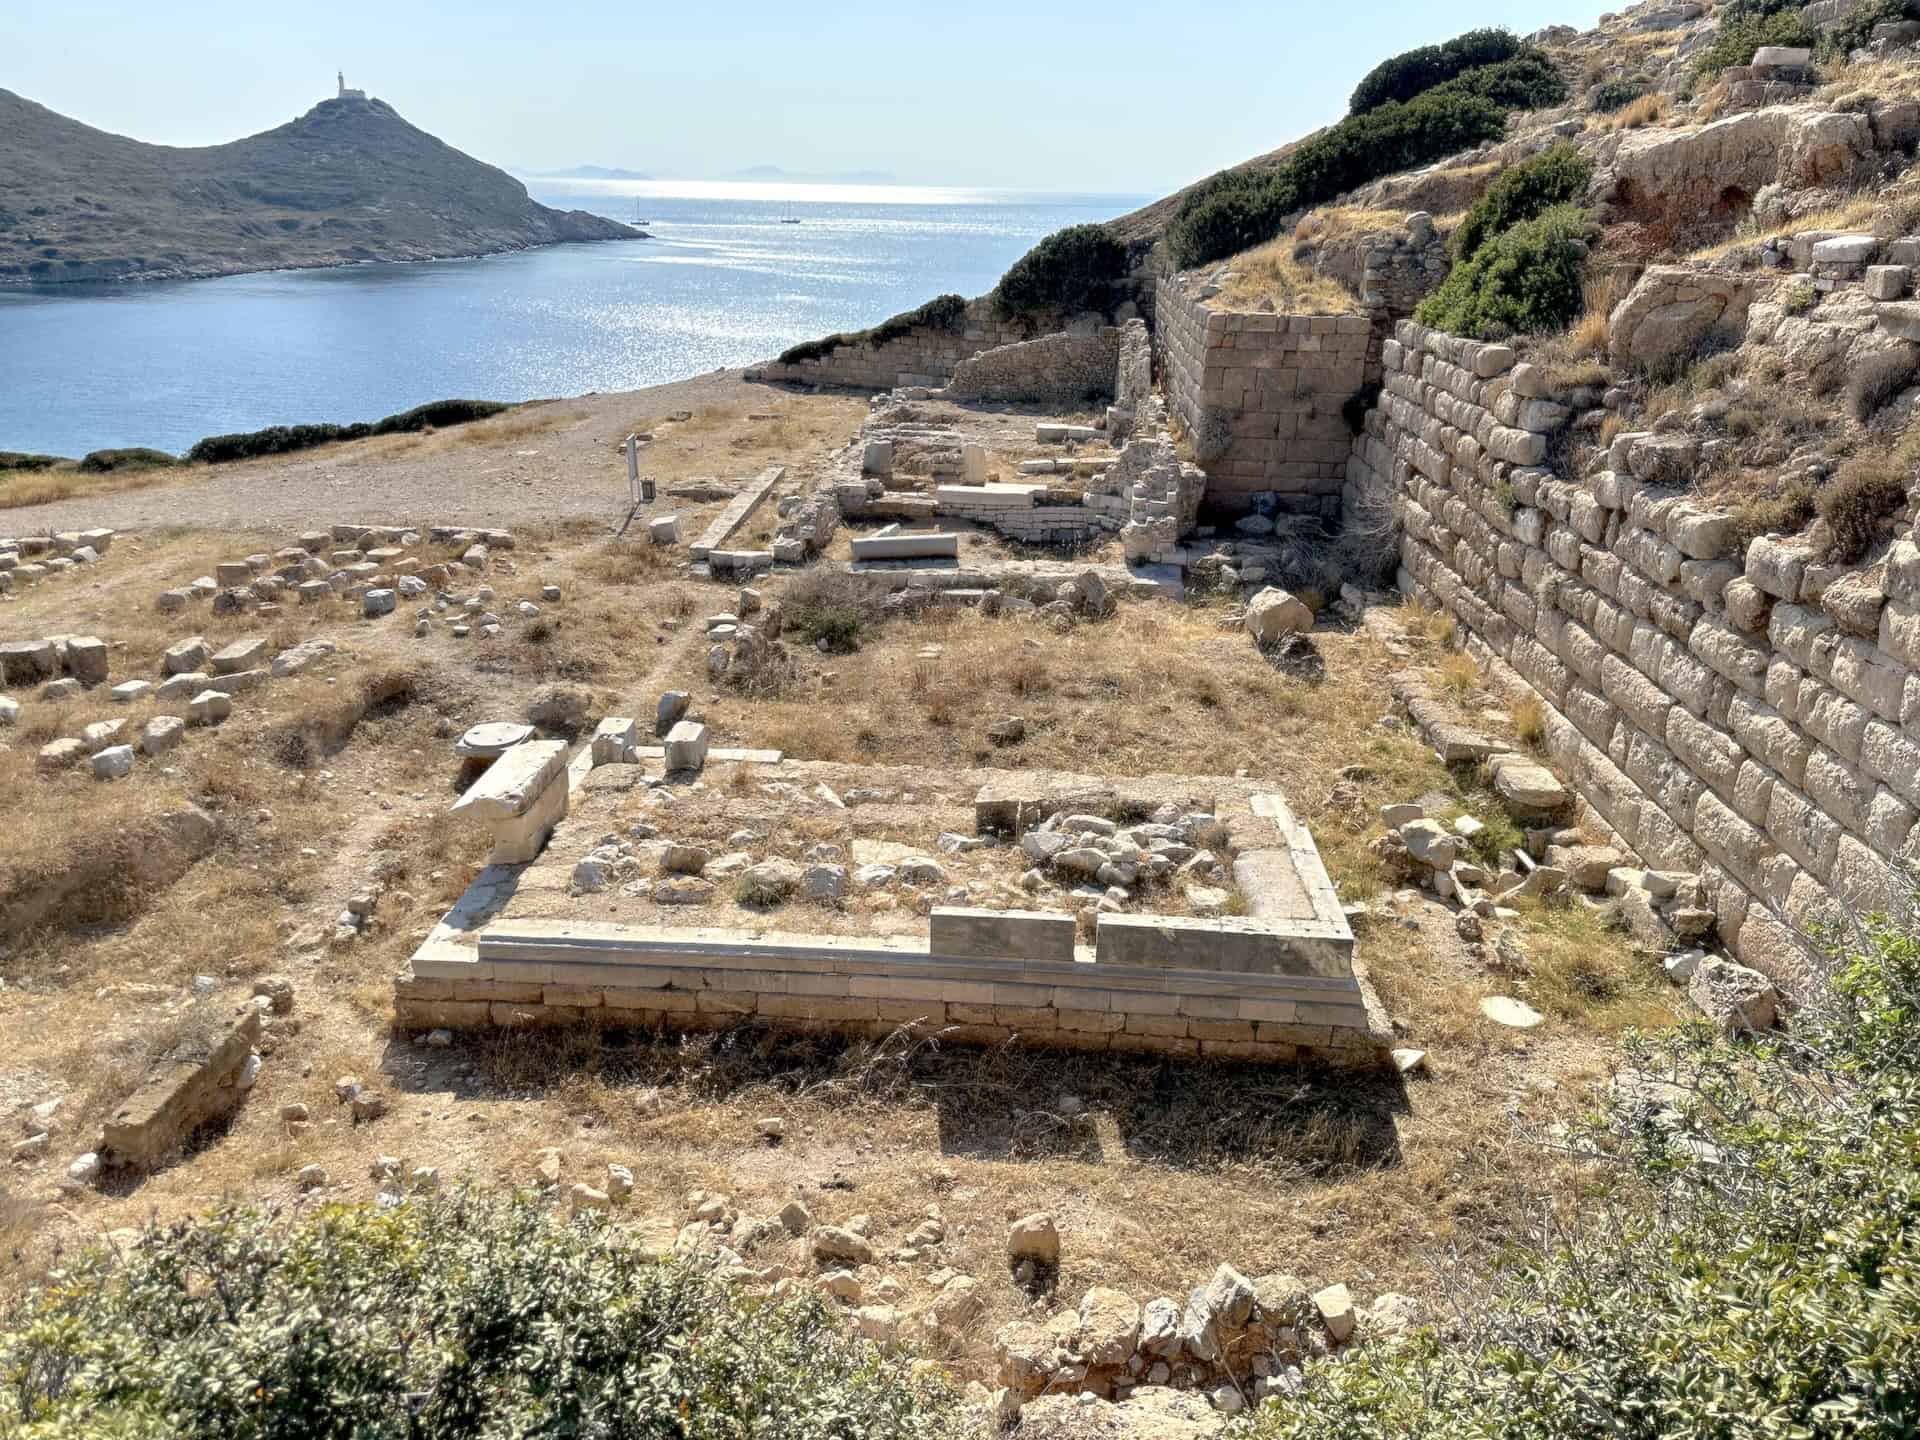 Temple of Apollo (rear) and altar (front) at Knidos on Datça Peninsula, Turkey